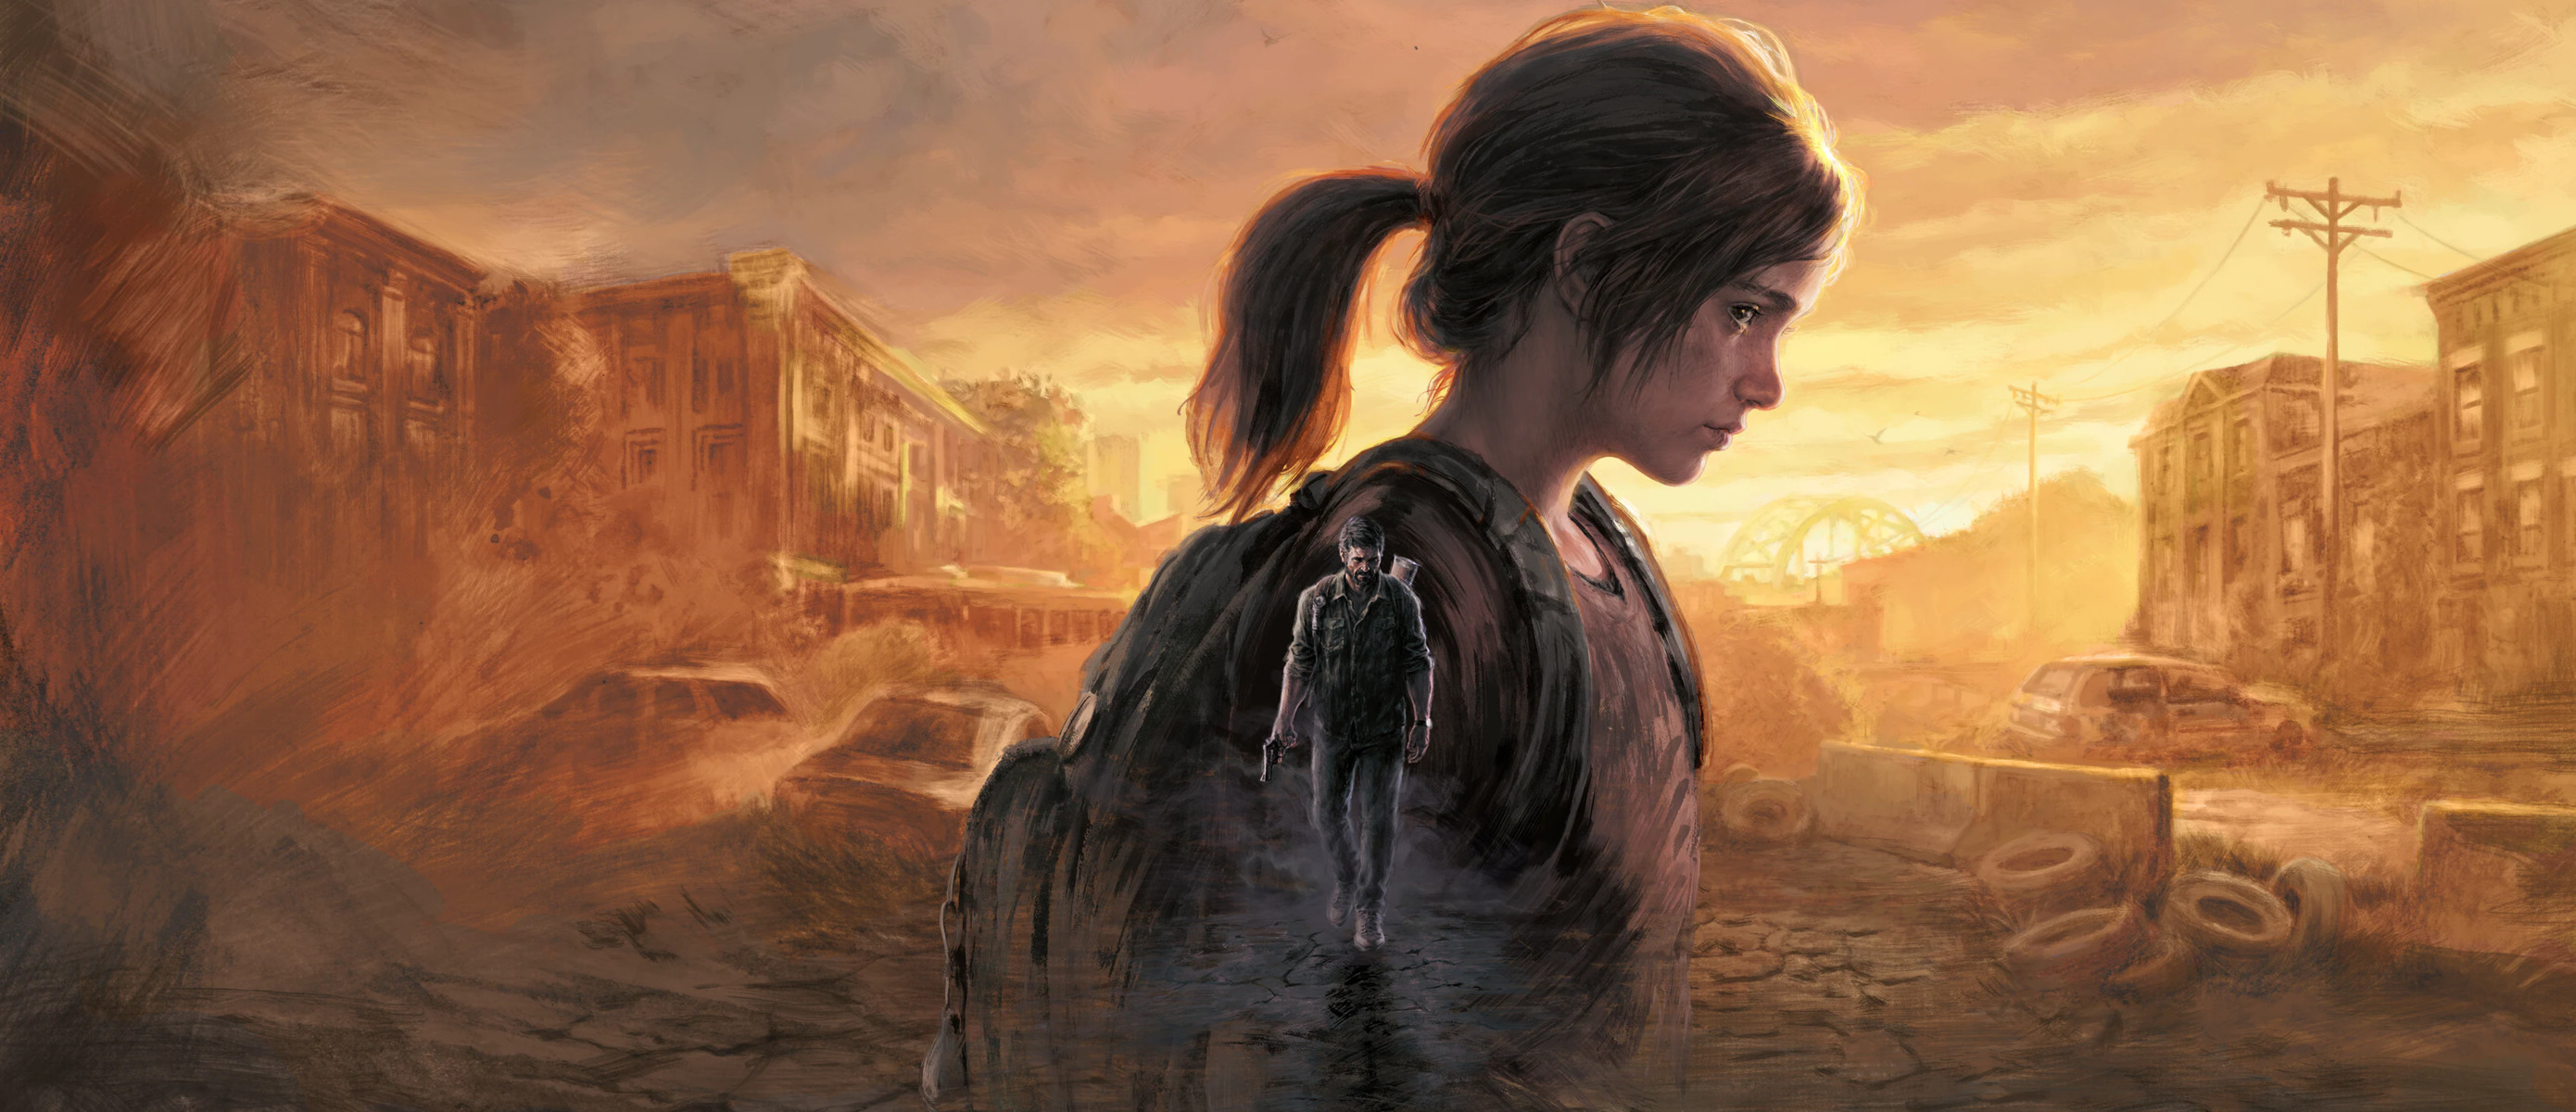 Will the last of us be on steam фото 73